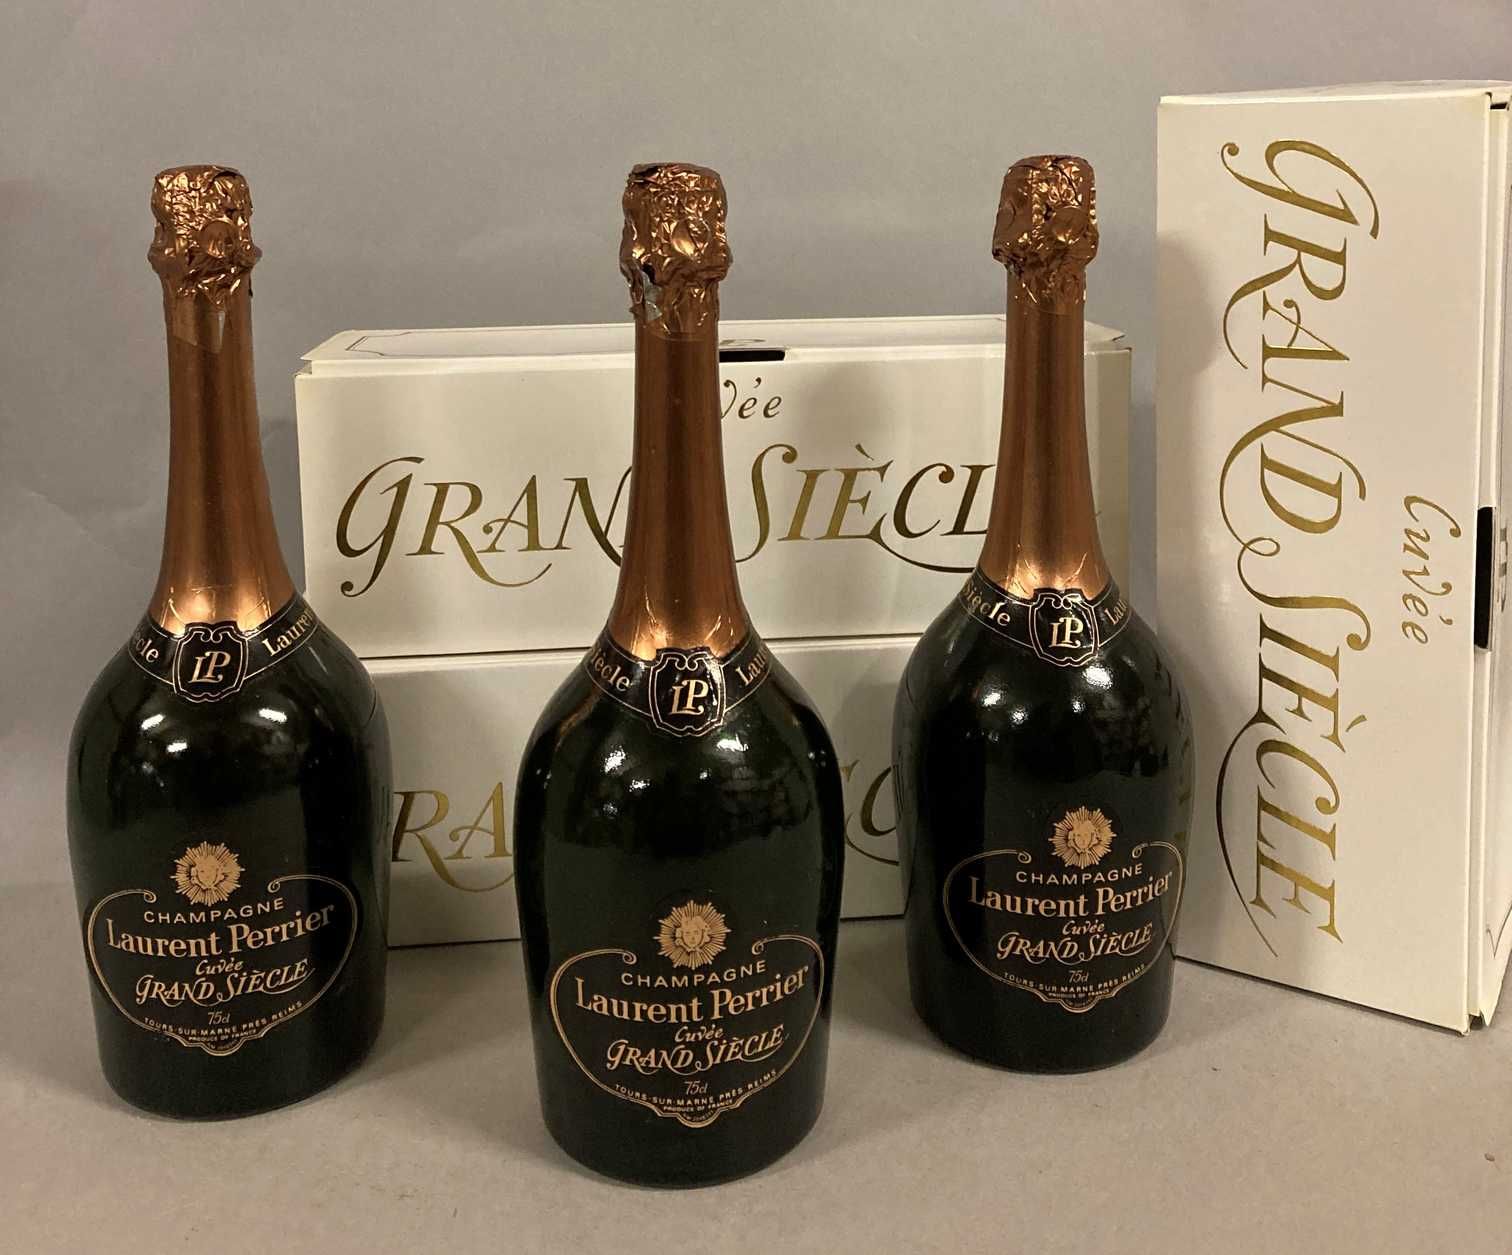 Null 3 bottles CHAMPAGNE "Grand Siècle", Laurent-Perrier (1 LB, 2 MB) in a case